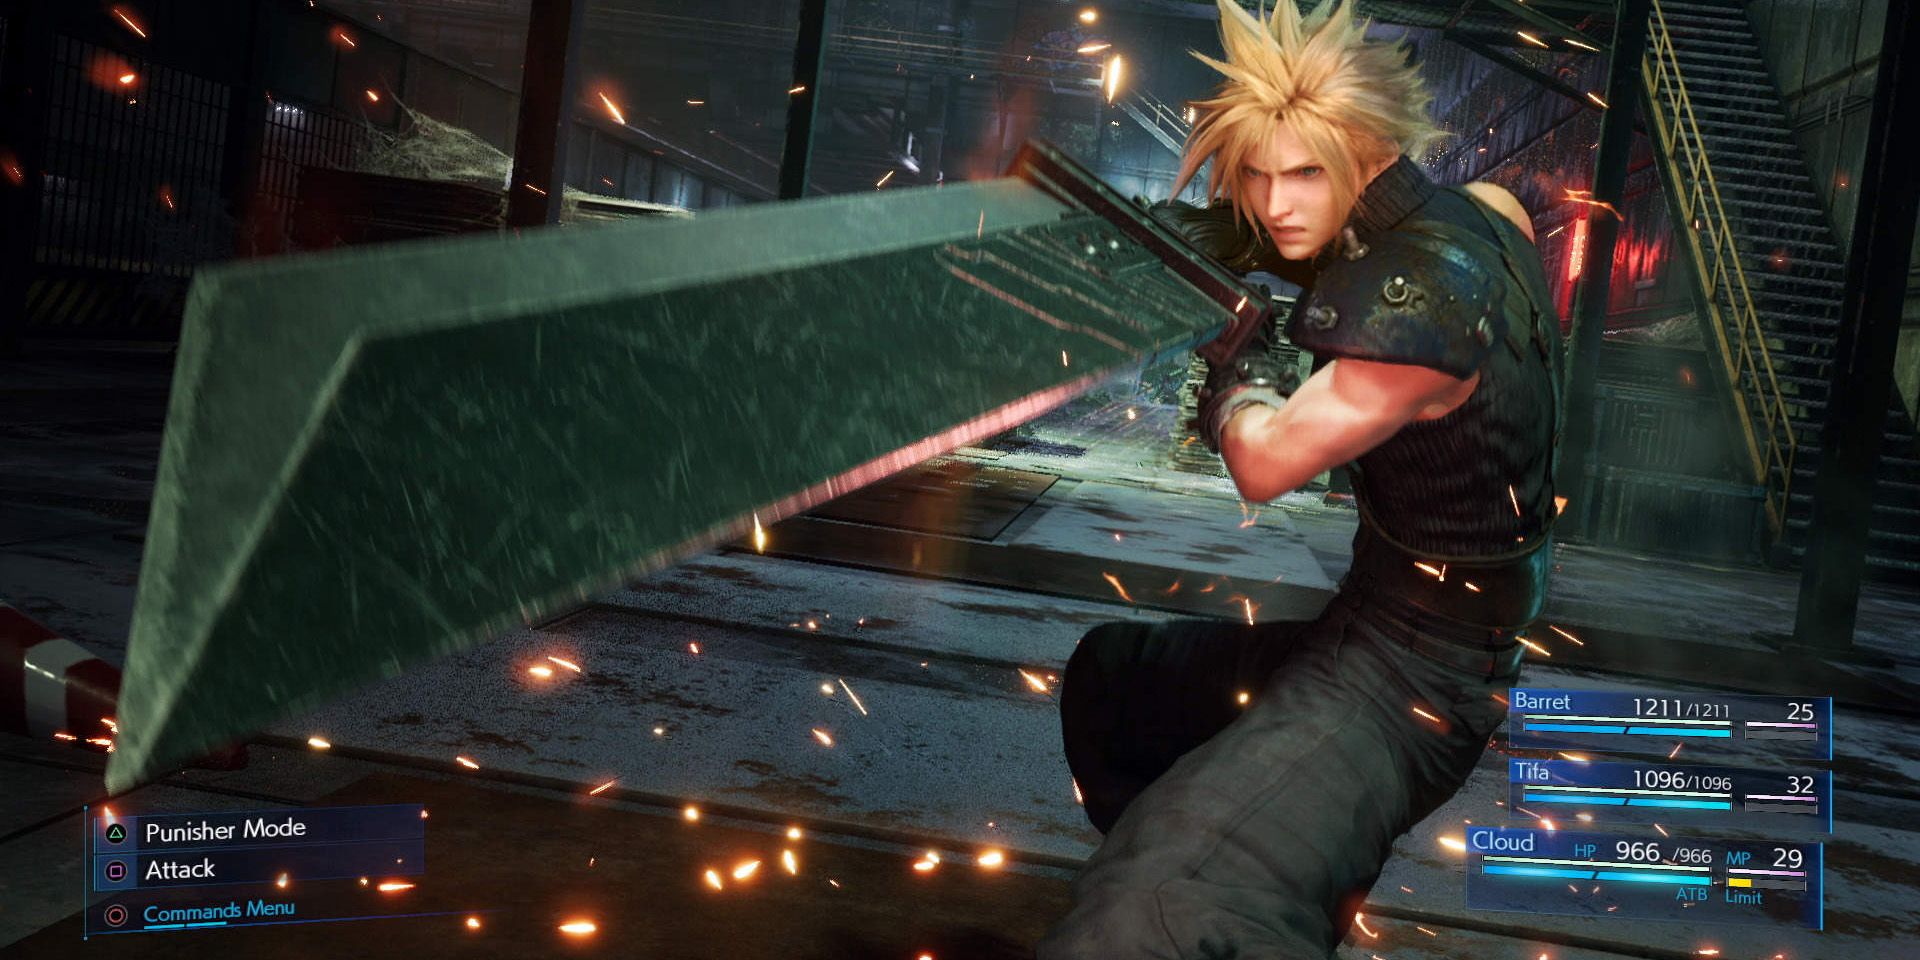 The combat in Final Fantasy VII Remake is very different to the original game